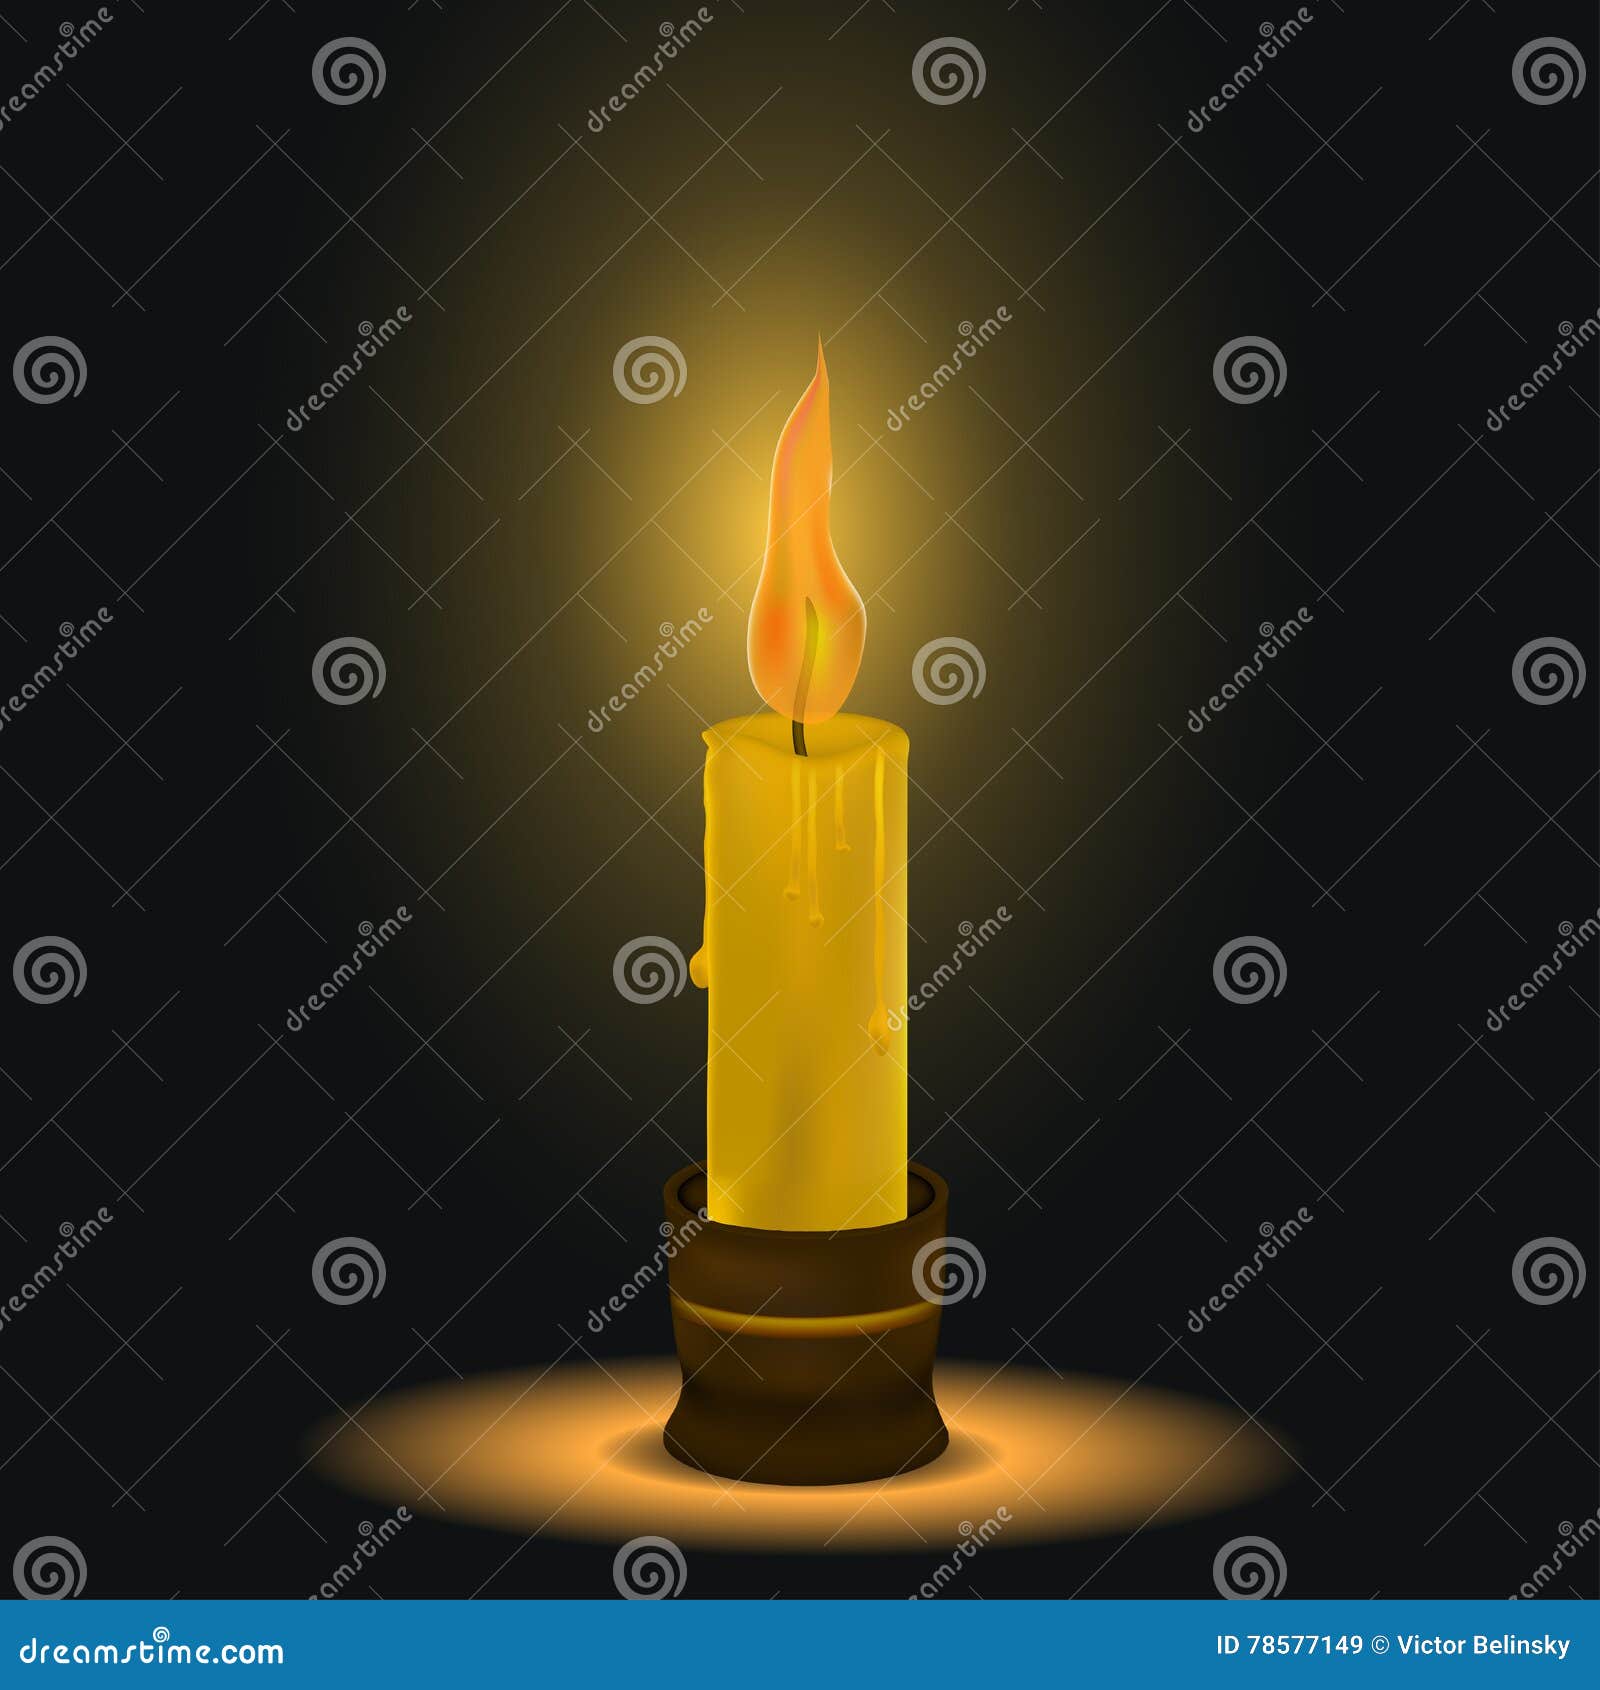 Candle with burning flame and melting wax Vector Image